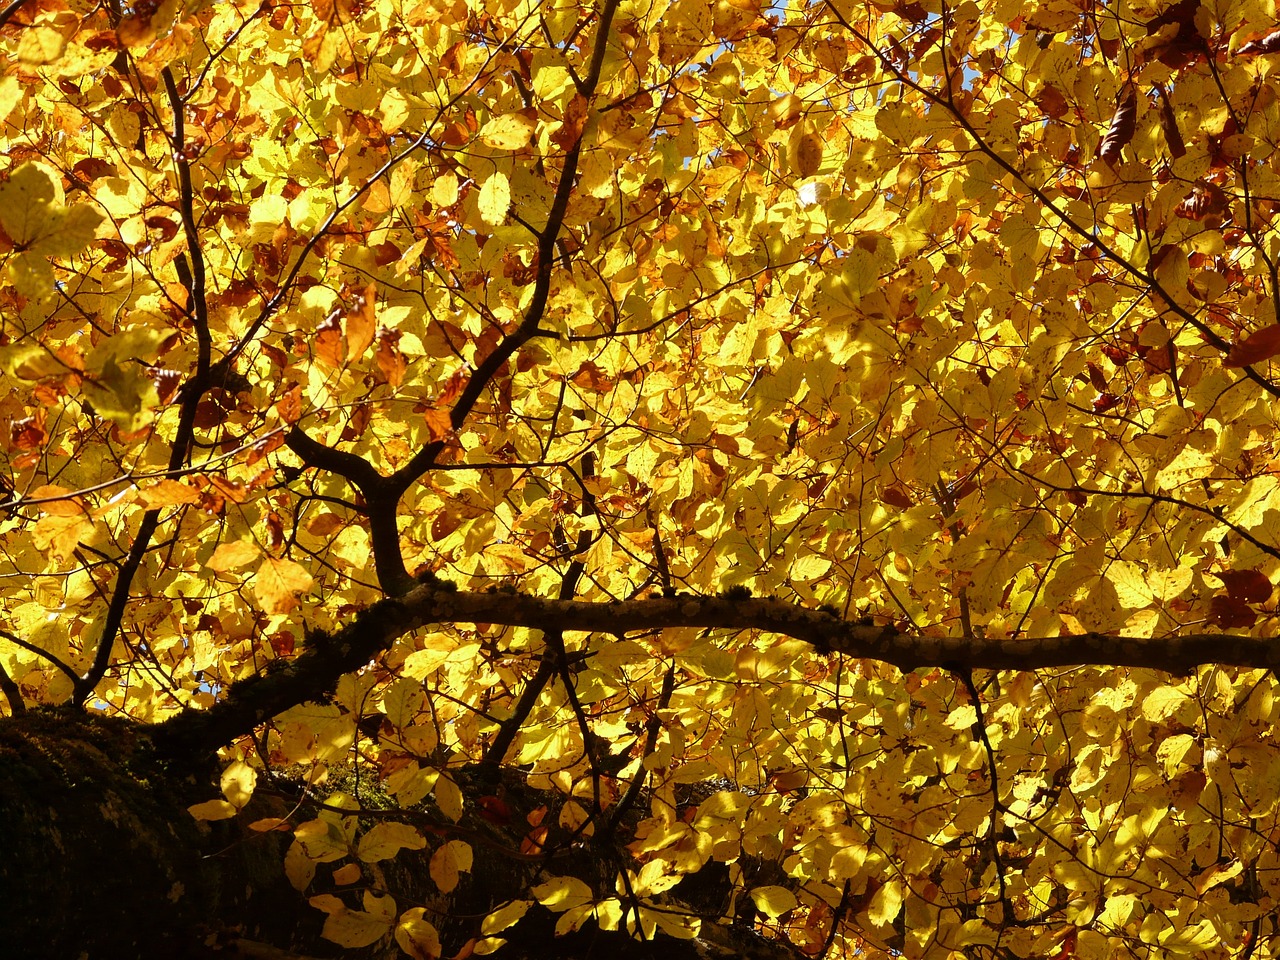 a close up of a tree with yellow leaves, inspired by S J "Lamorna" Birch, pexels, beams of golden light, full of colour 8-w 1024, back lit, 1 6 x 1 6